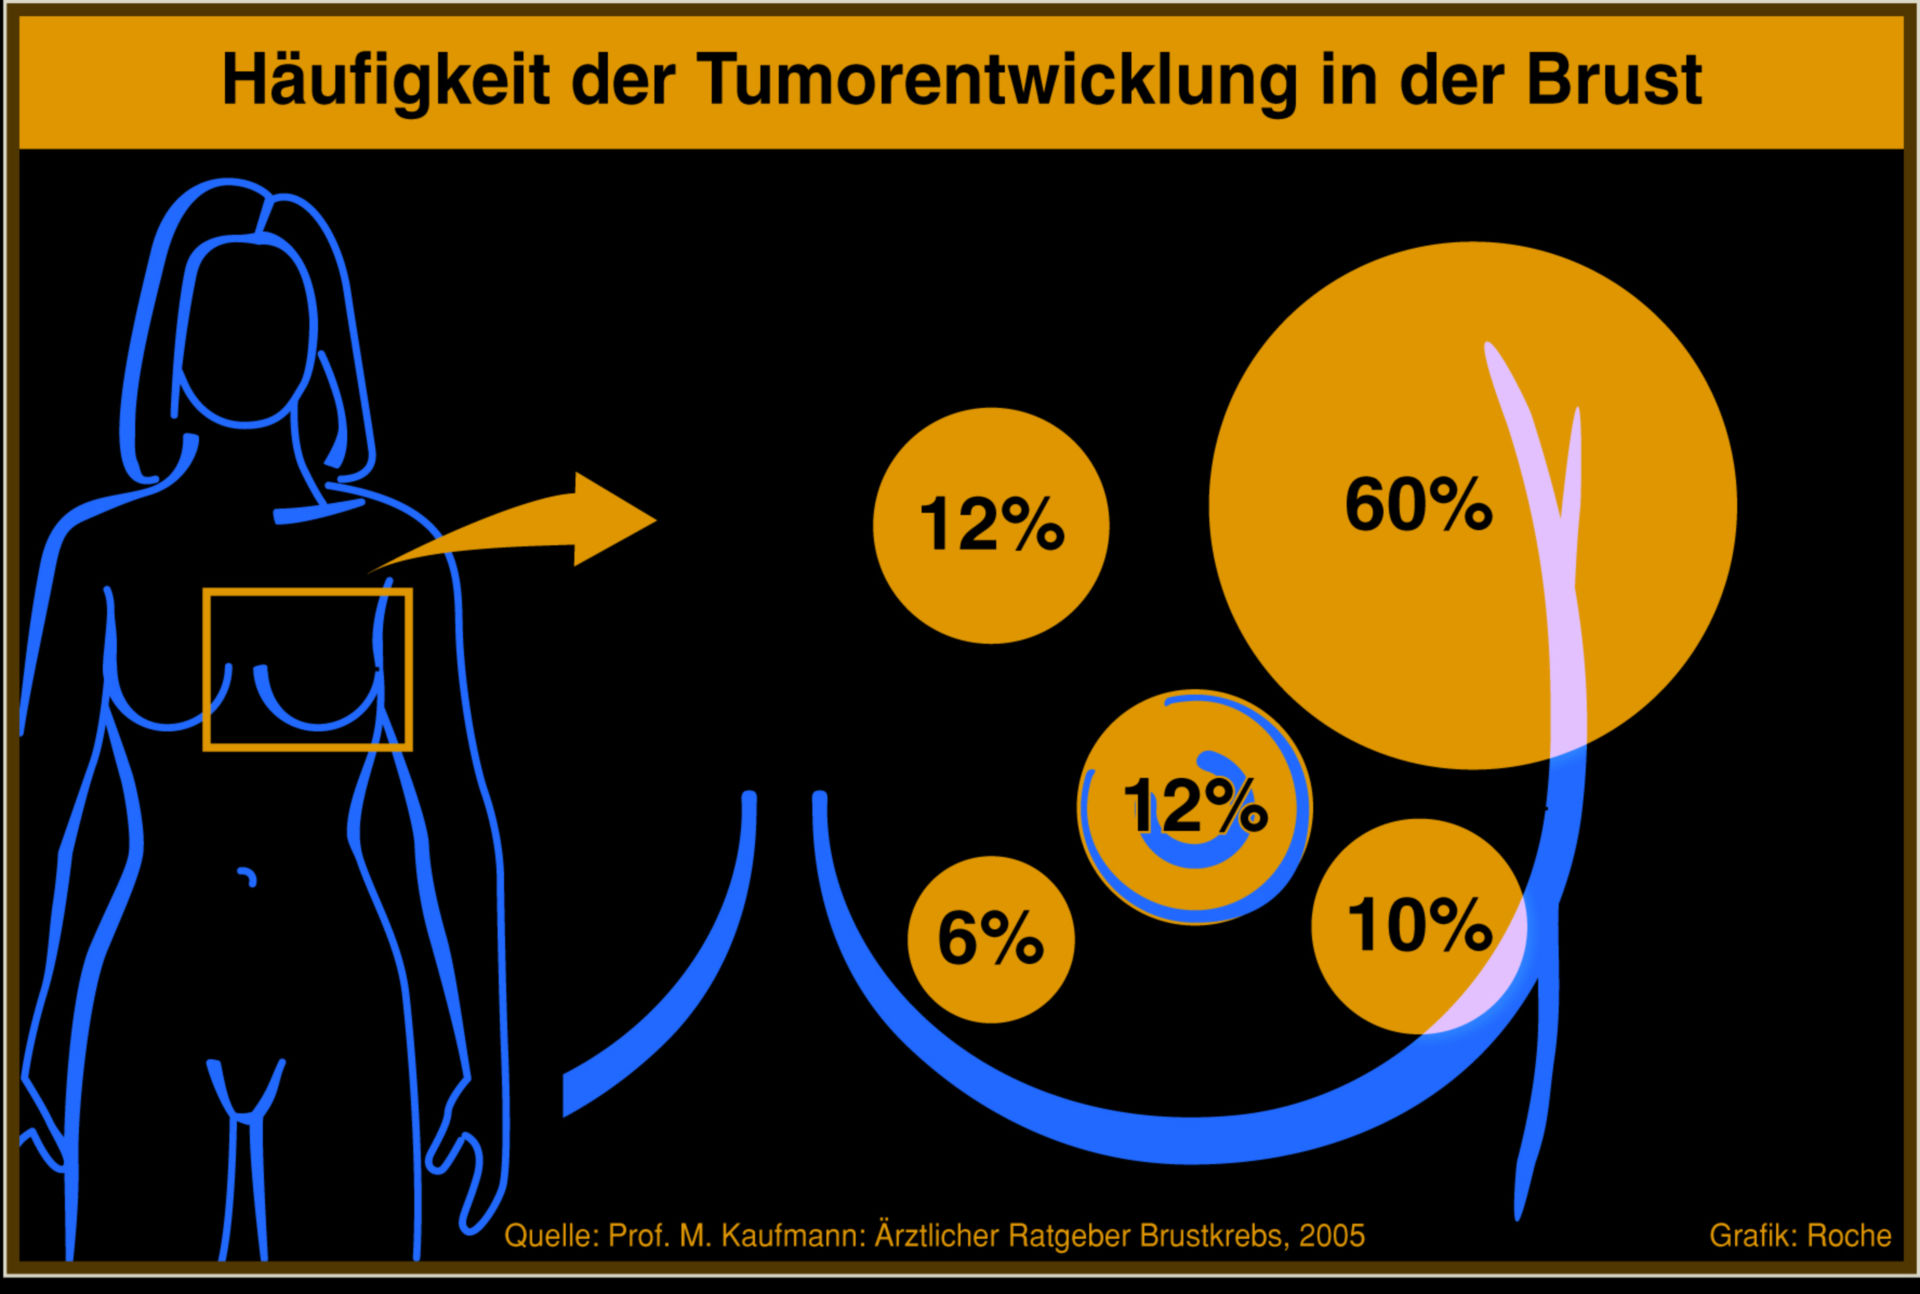 Frequency of tumor devolopment in the breast